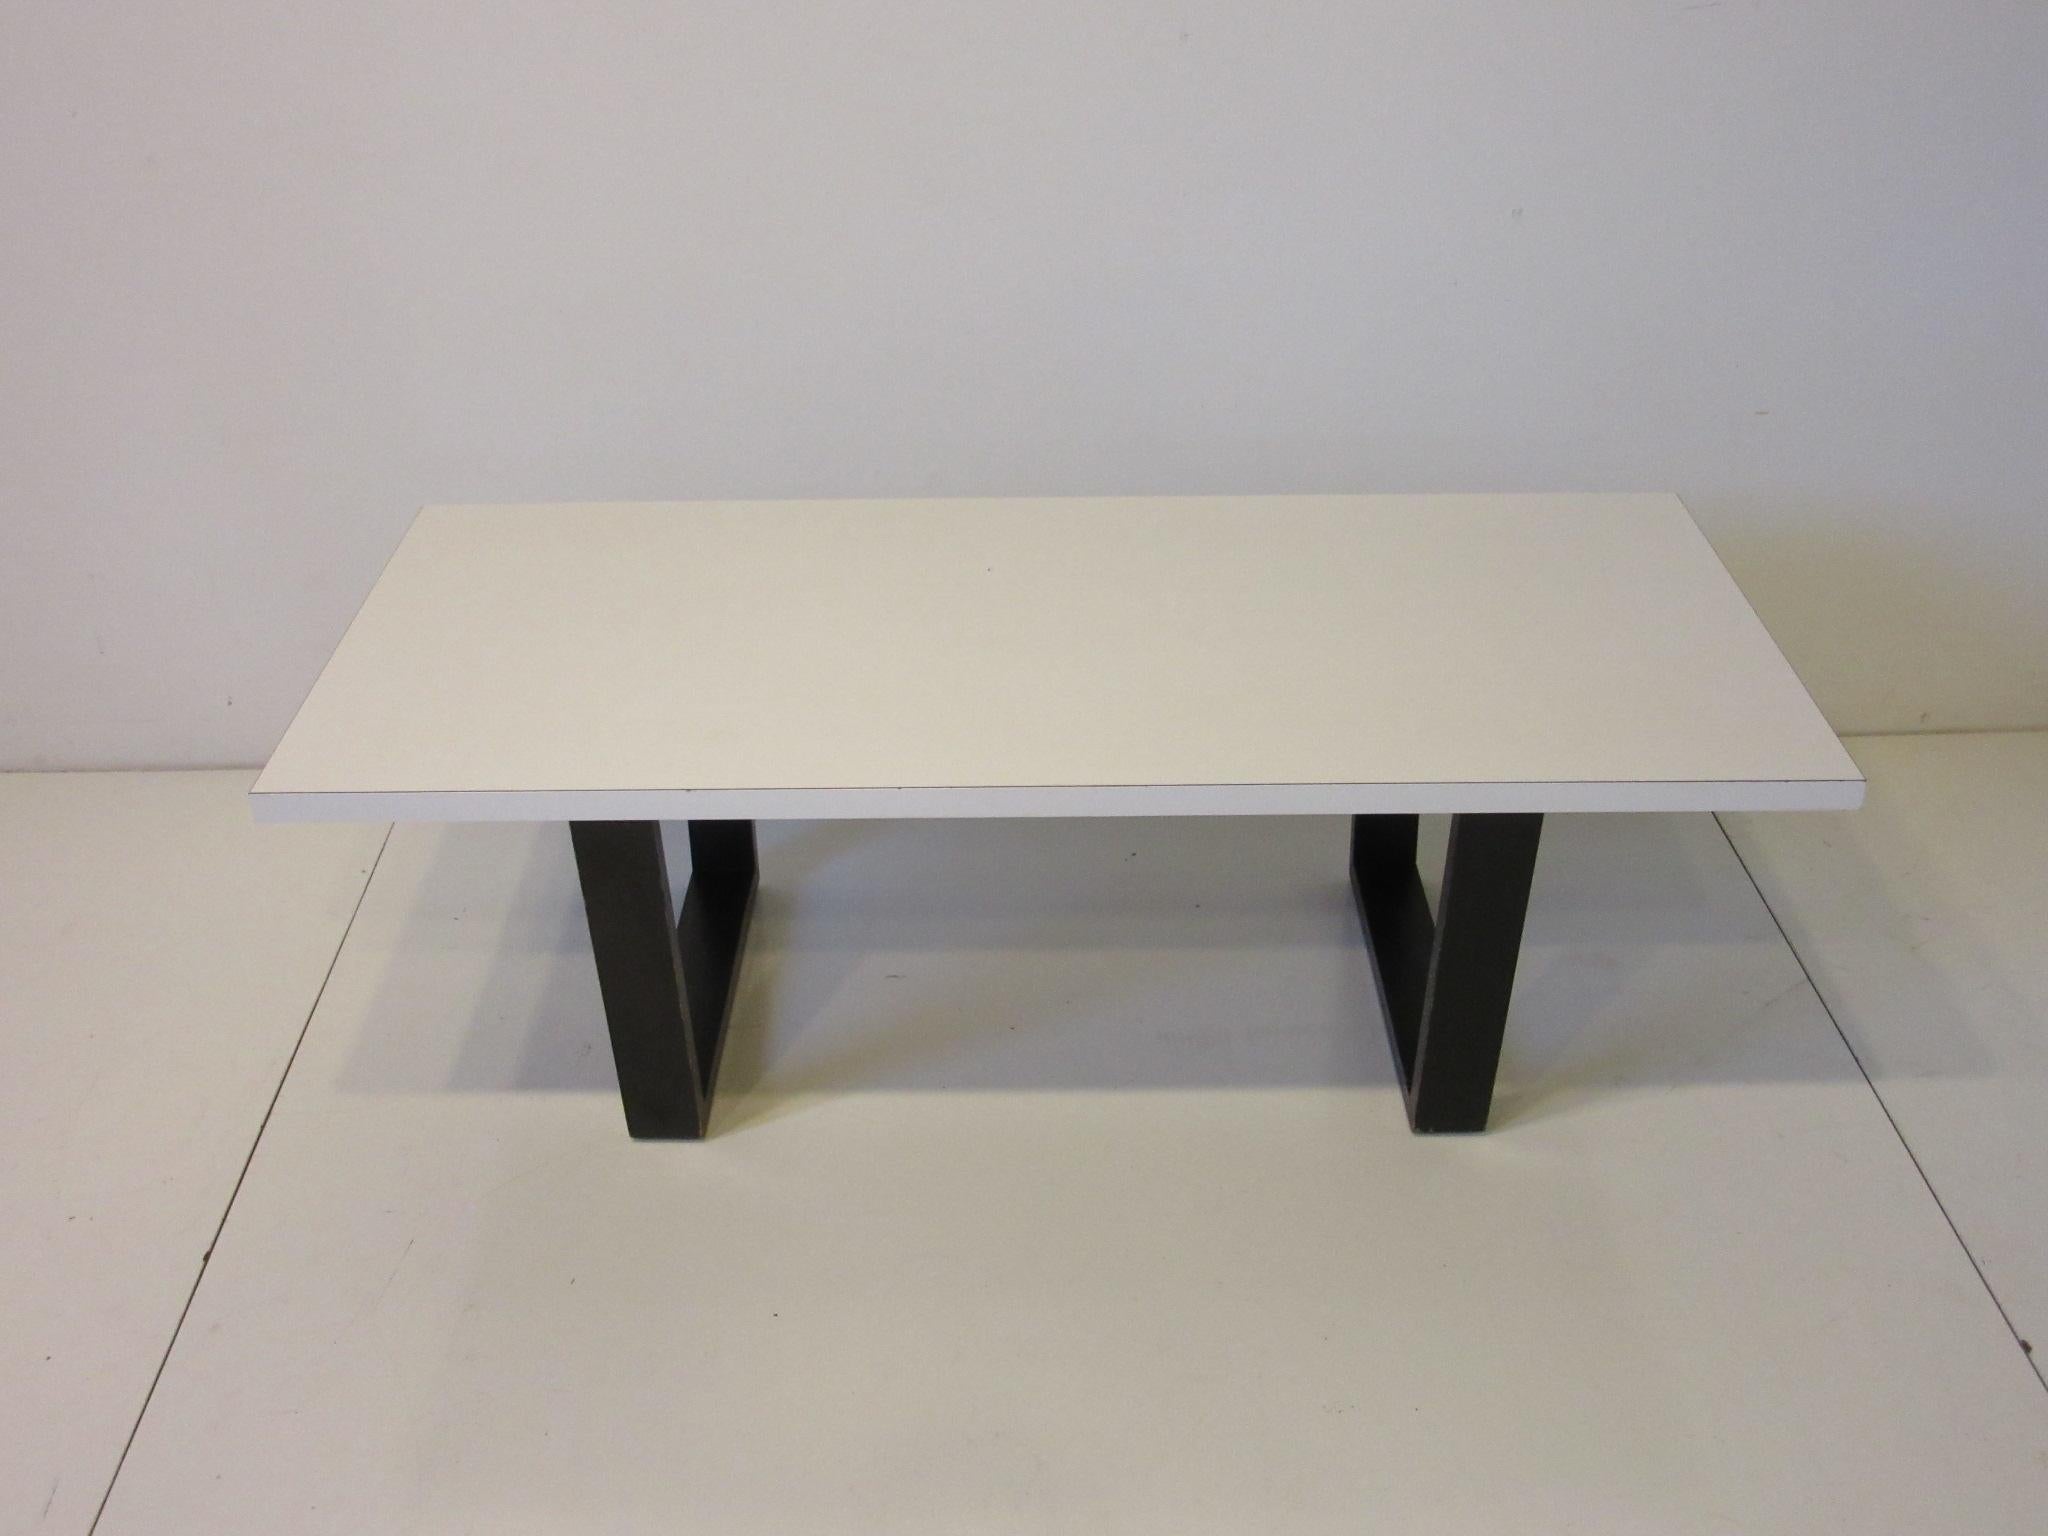 A early and rare Nelson coffee table / bench with white rectangle Laminate top having black legs typical of the Nelson slat bench coffee table. This table was not produced in large numbers for retail sale and was purchase in Zeeland Michigan from a